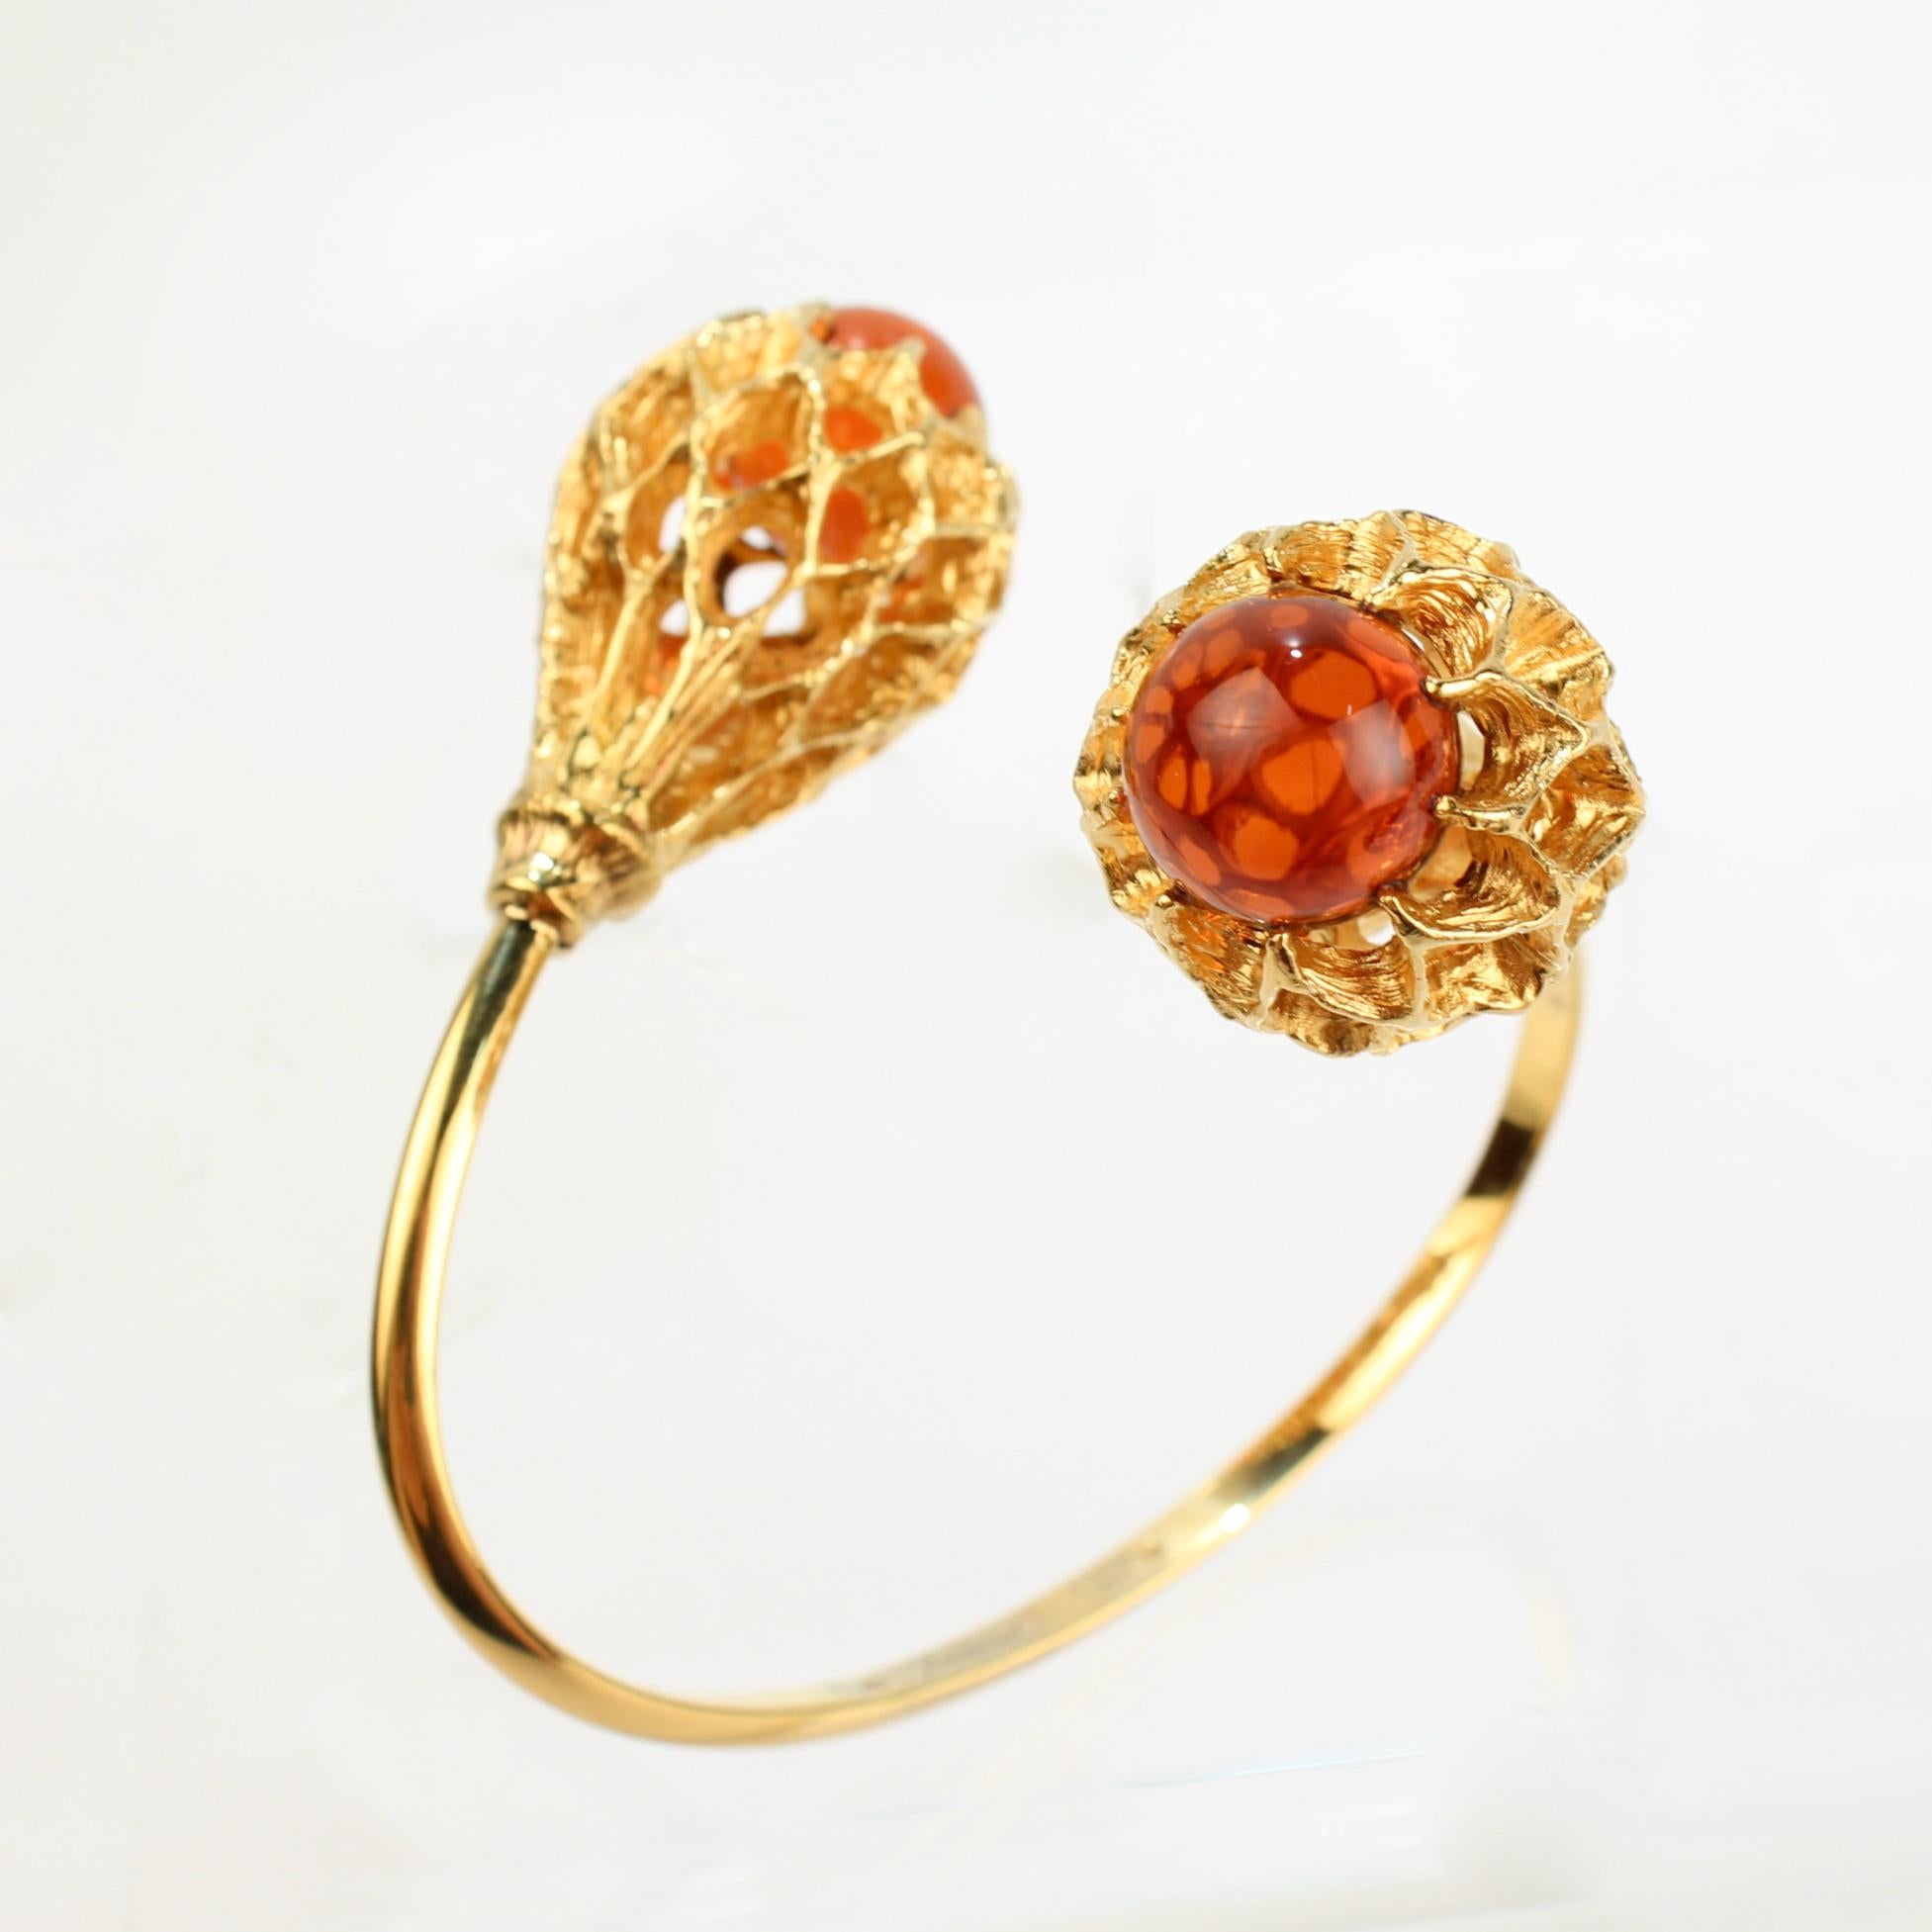 A fine Baccarat Merveille 'Moi et Toi' bracelet.

In vermeil or gilt sterling silver with amber-colored, spherical glass stones.

Simply great wearable design from one of France's leading glass houses!

Date:
21st Century

Maker:
Baccarat

Marks: